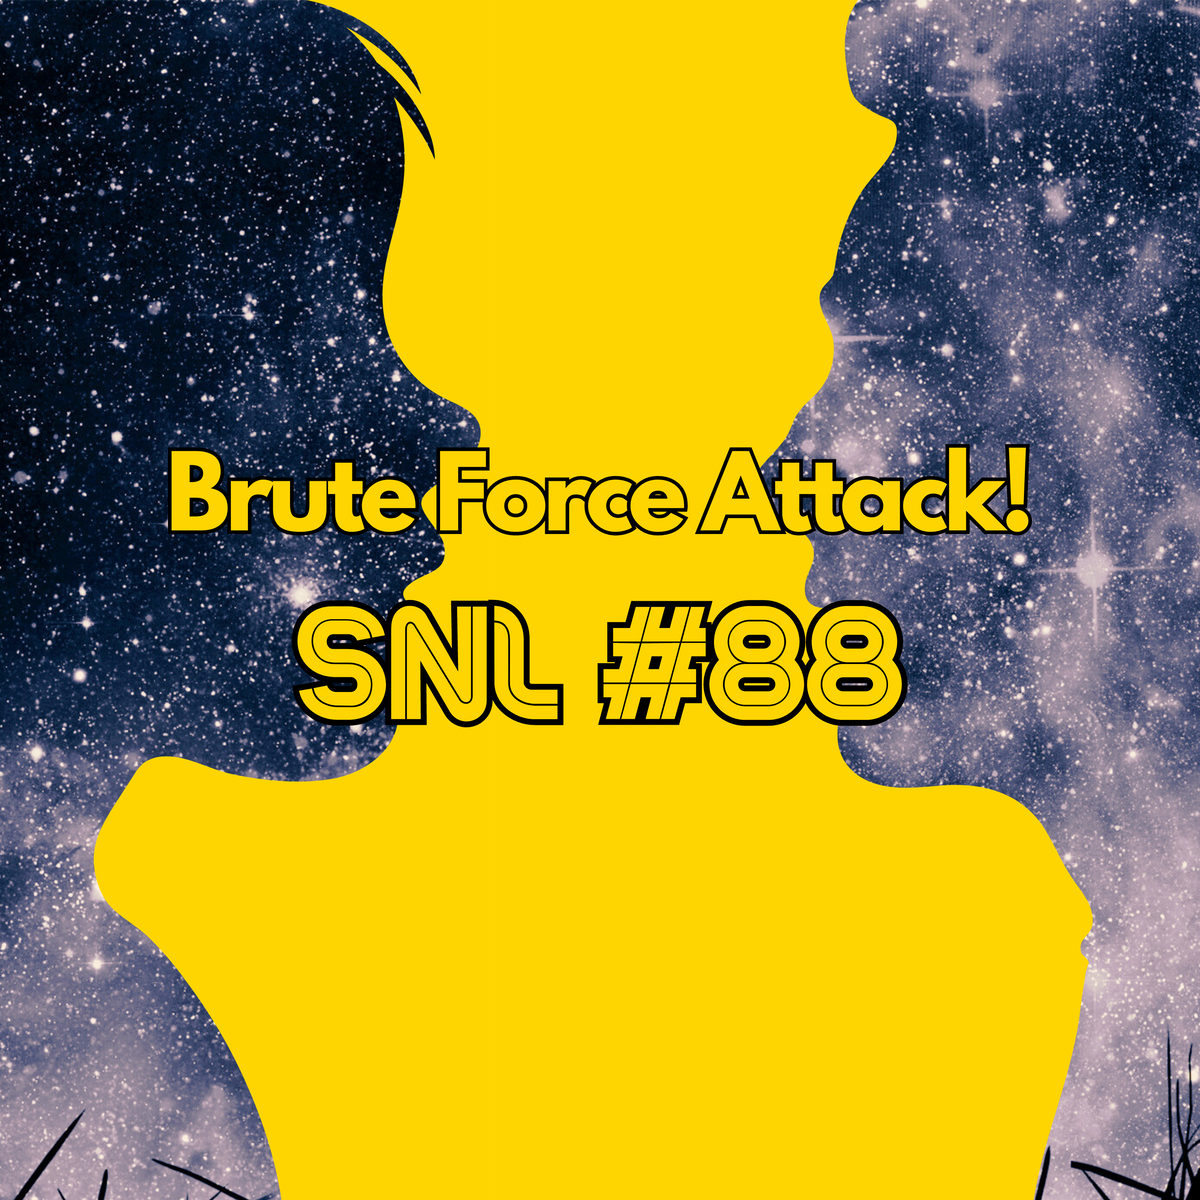 "Brute Force Attack!" - Stacker News Saturday Newsletter